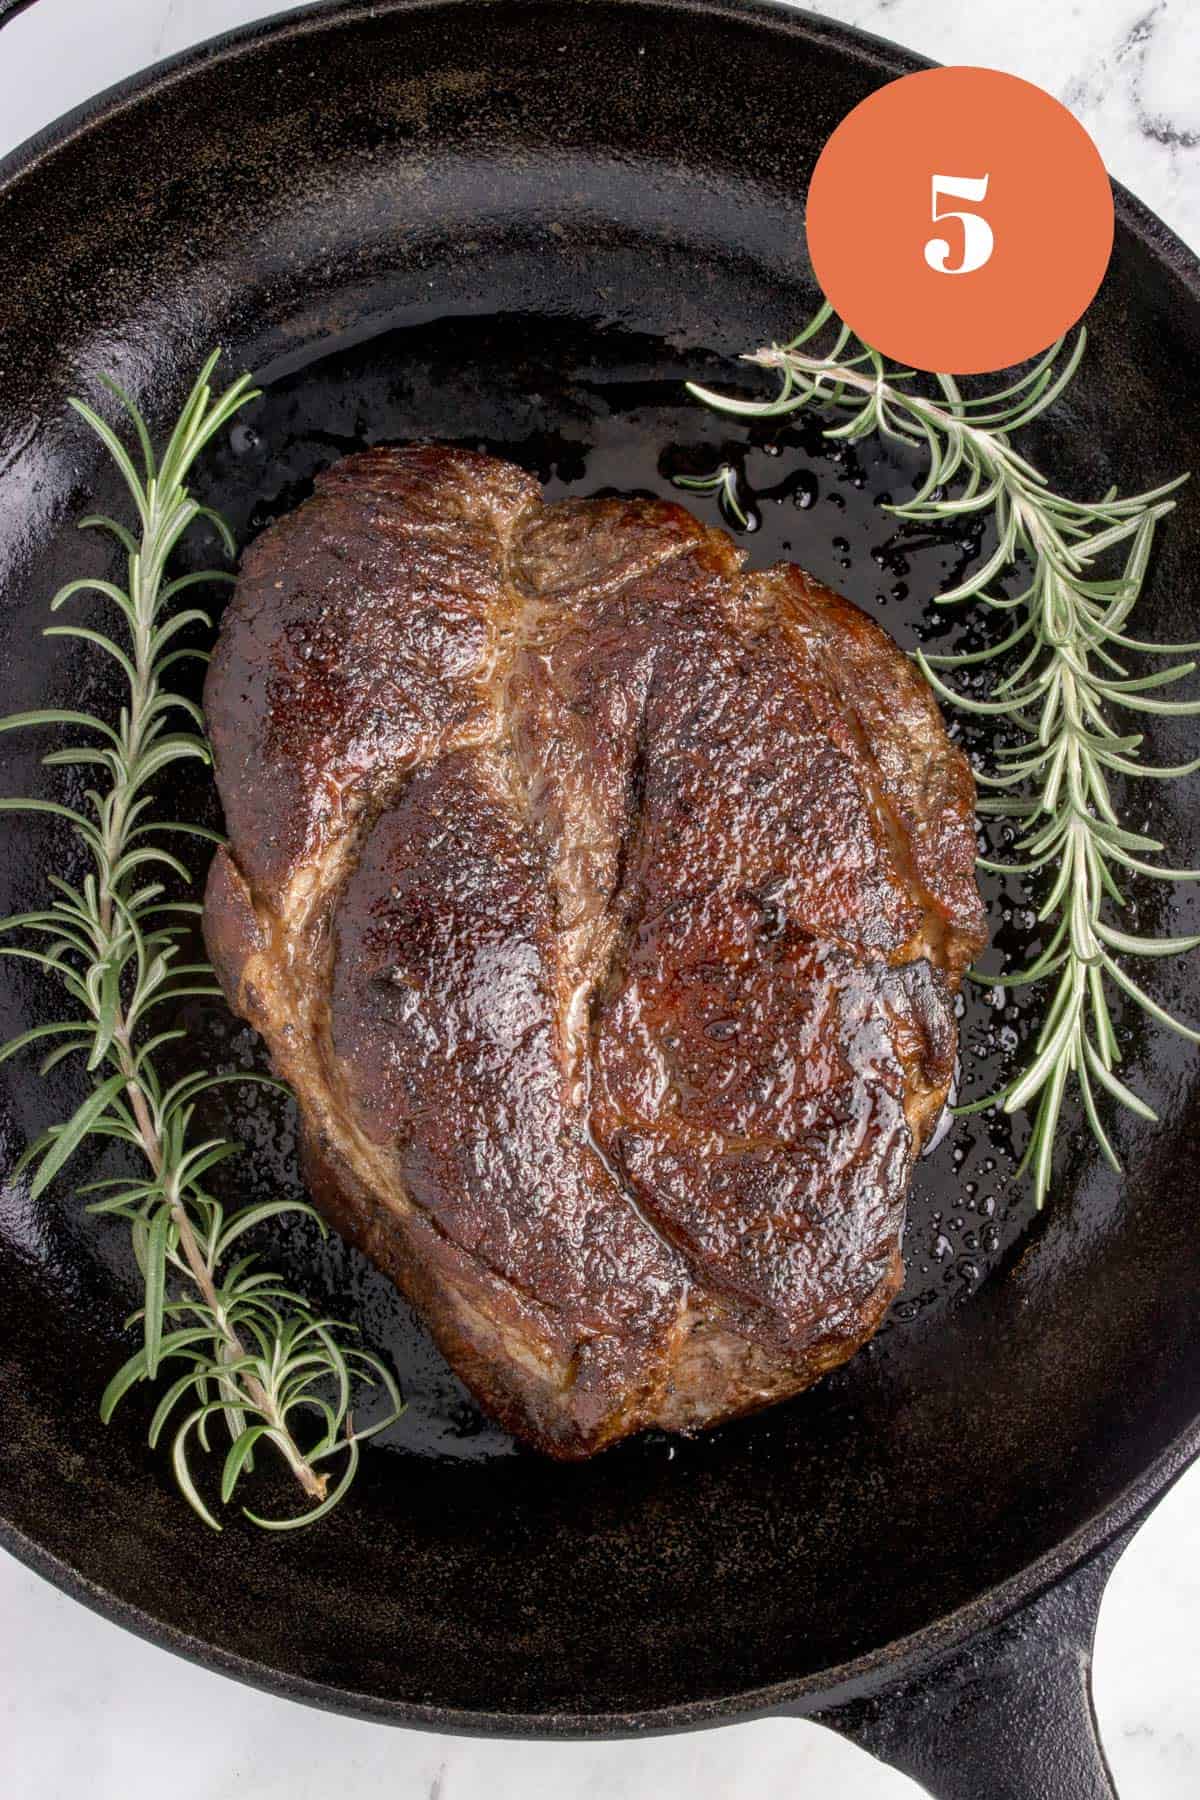 A chuck roast with rosemary springs being seared in a cast iron skillet.